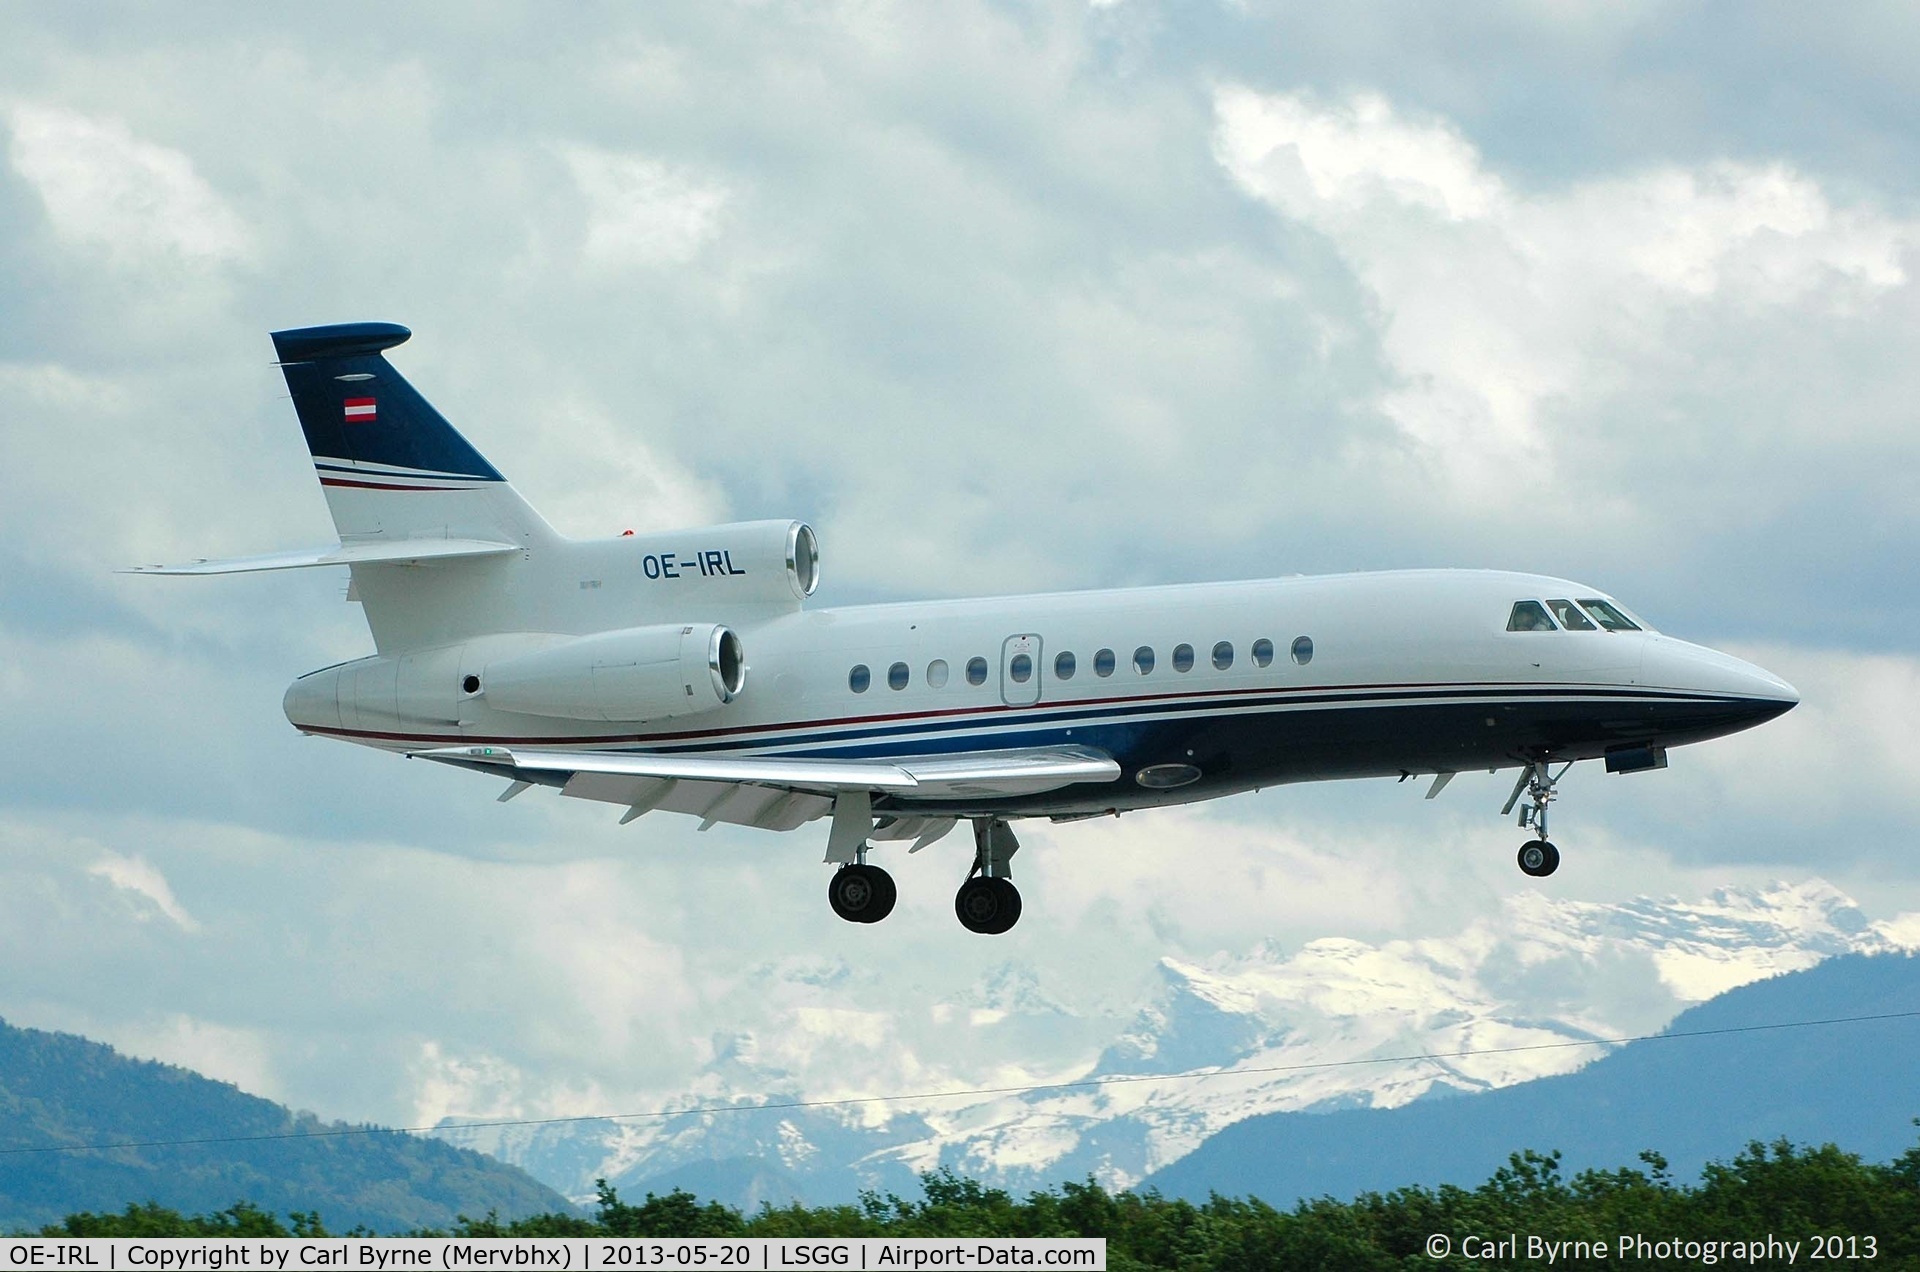 OE-IRL, 2003 Dassault Falcon 900EX C/N 118, Taken from the park at the 05 threshold.